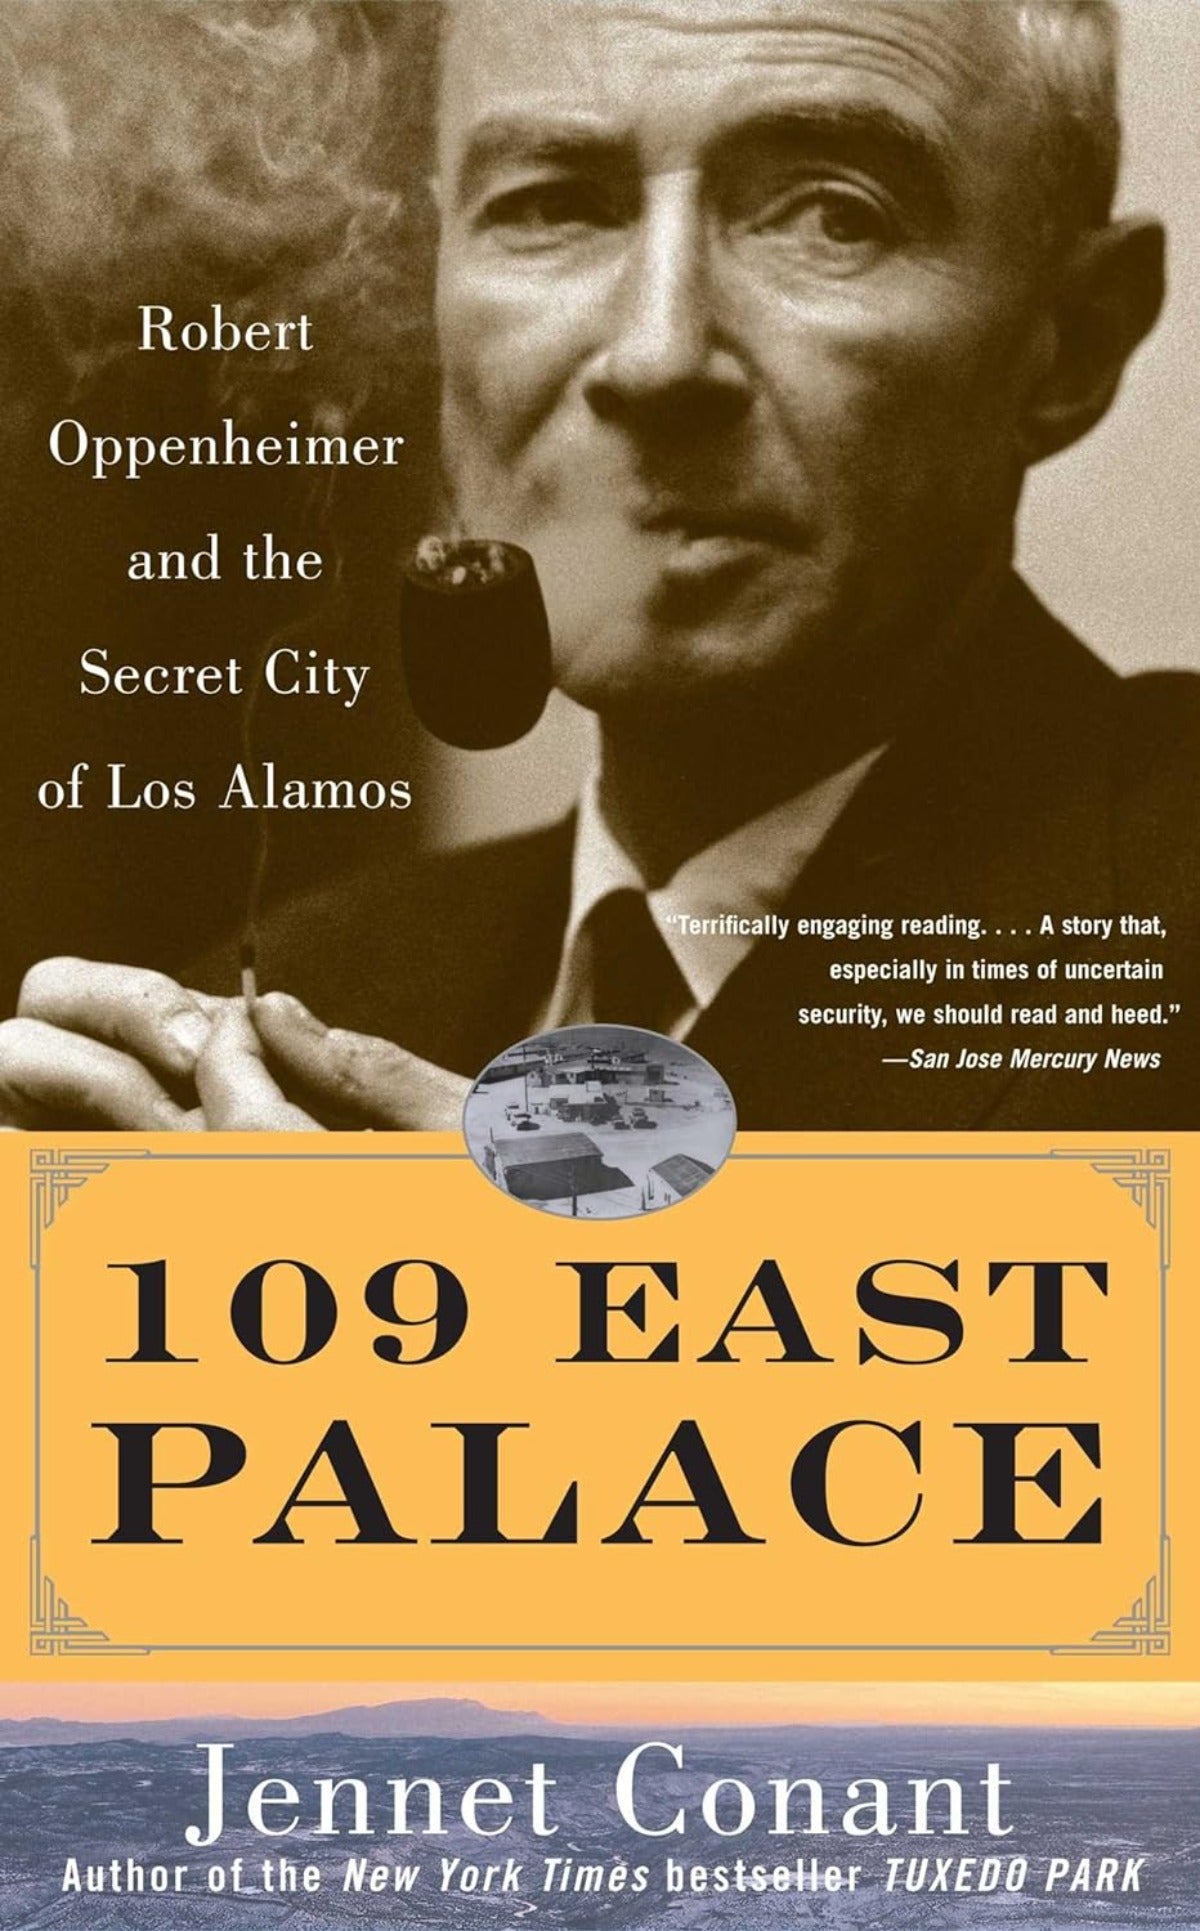 109 East Palace - Robert Oppenheimer and the Secret City of Los Alamos